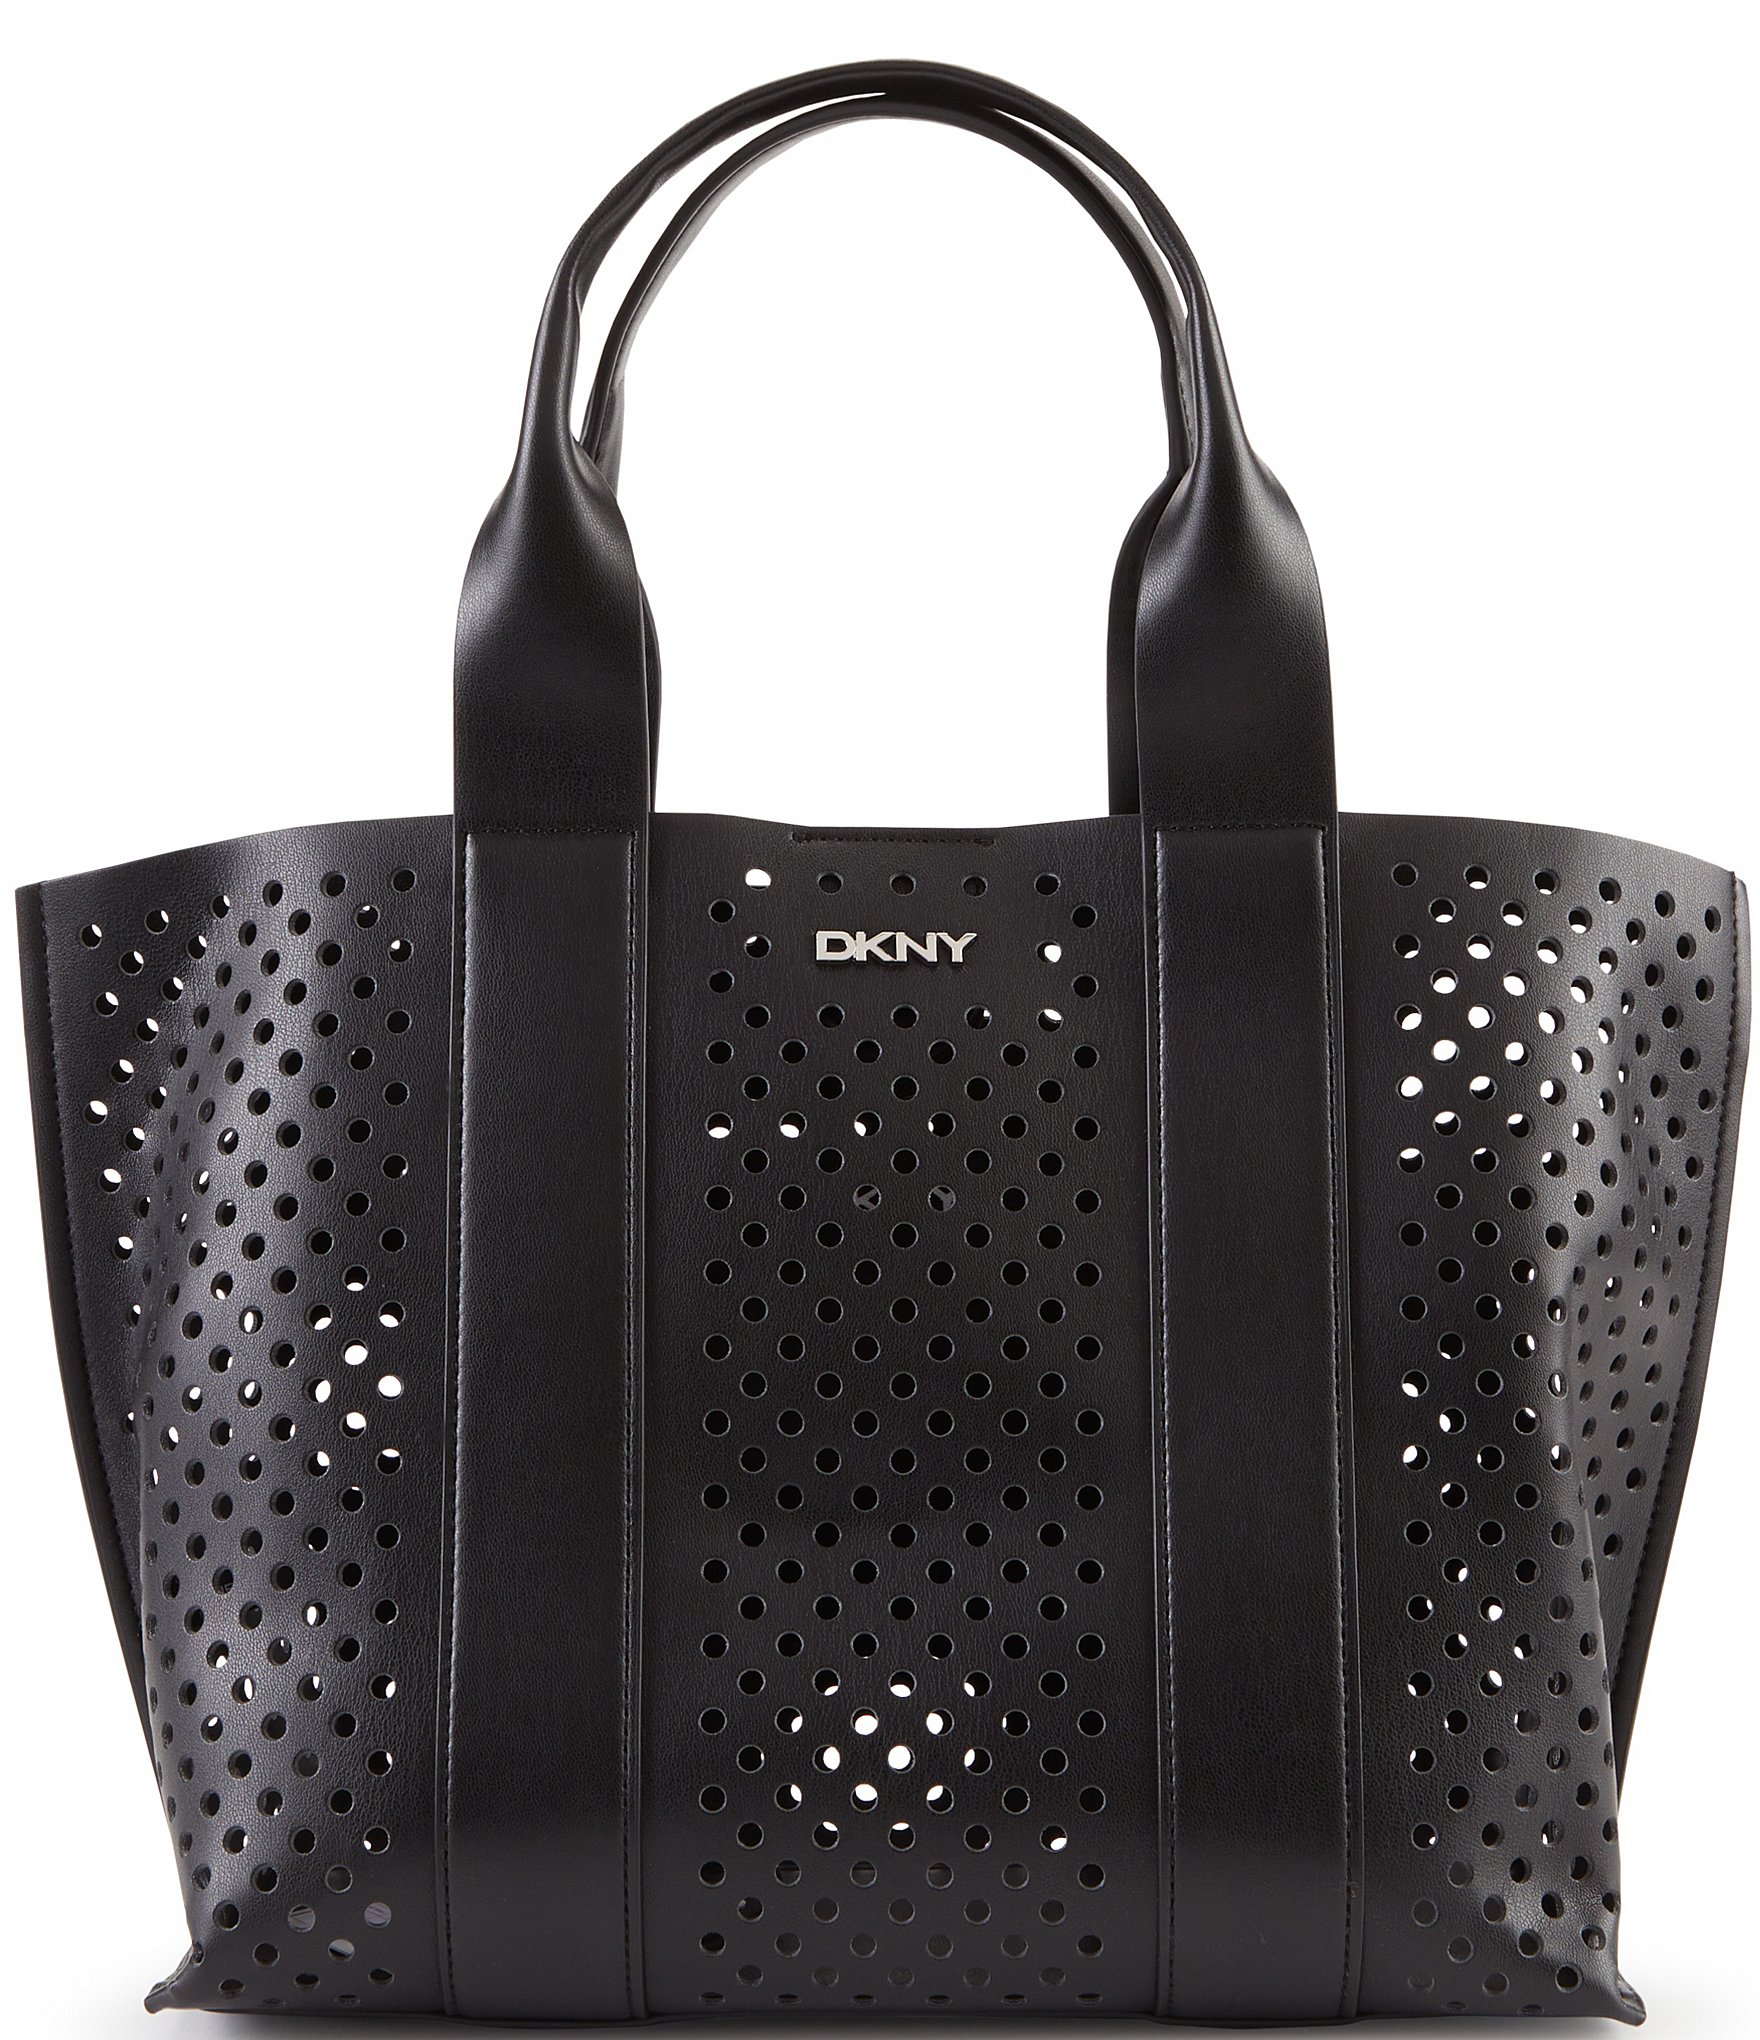 Dkny Women's The Mini Effortless Tote in Brown Leather